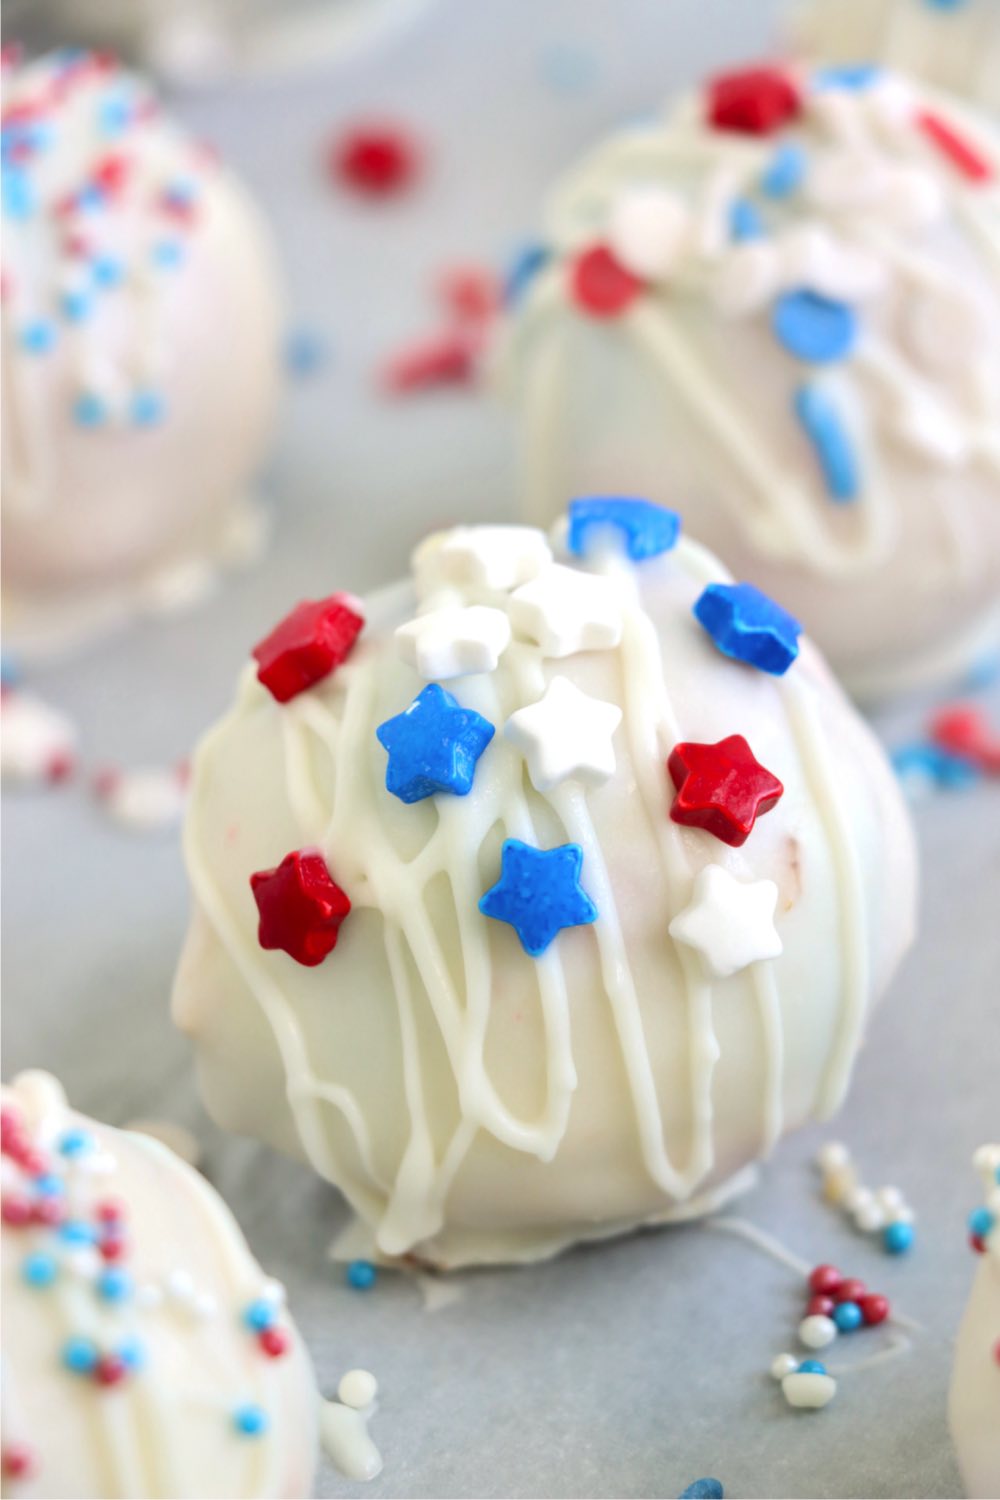 White chocolate covered truffle with red, white and blue star sprinkles.